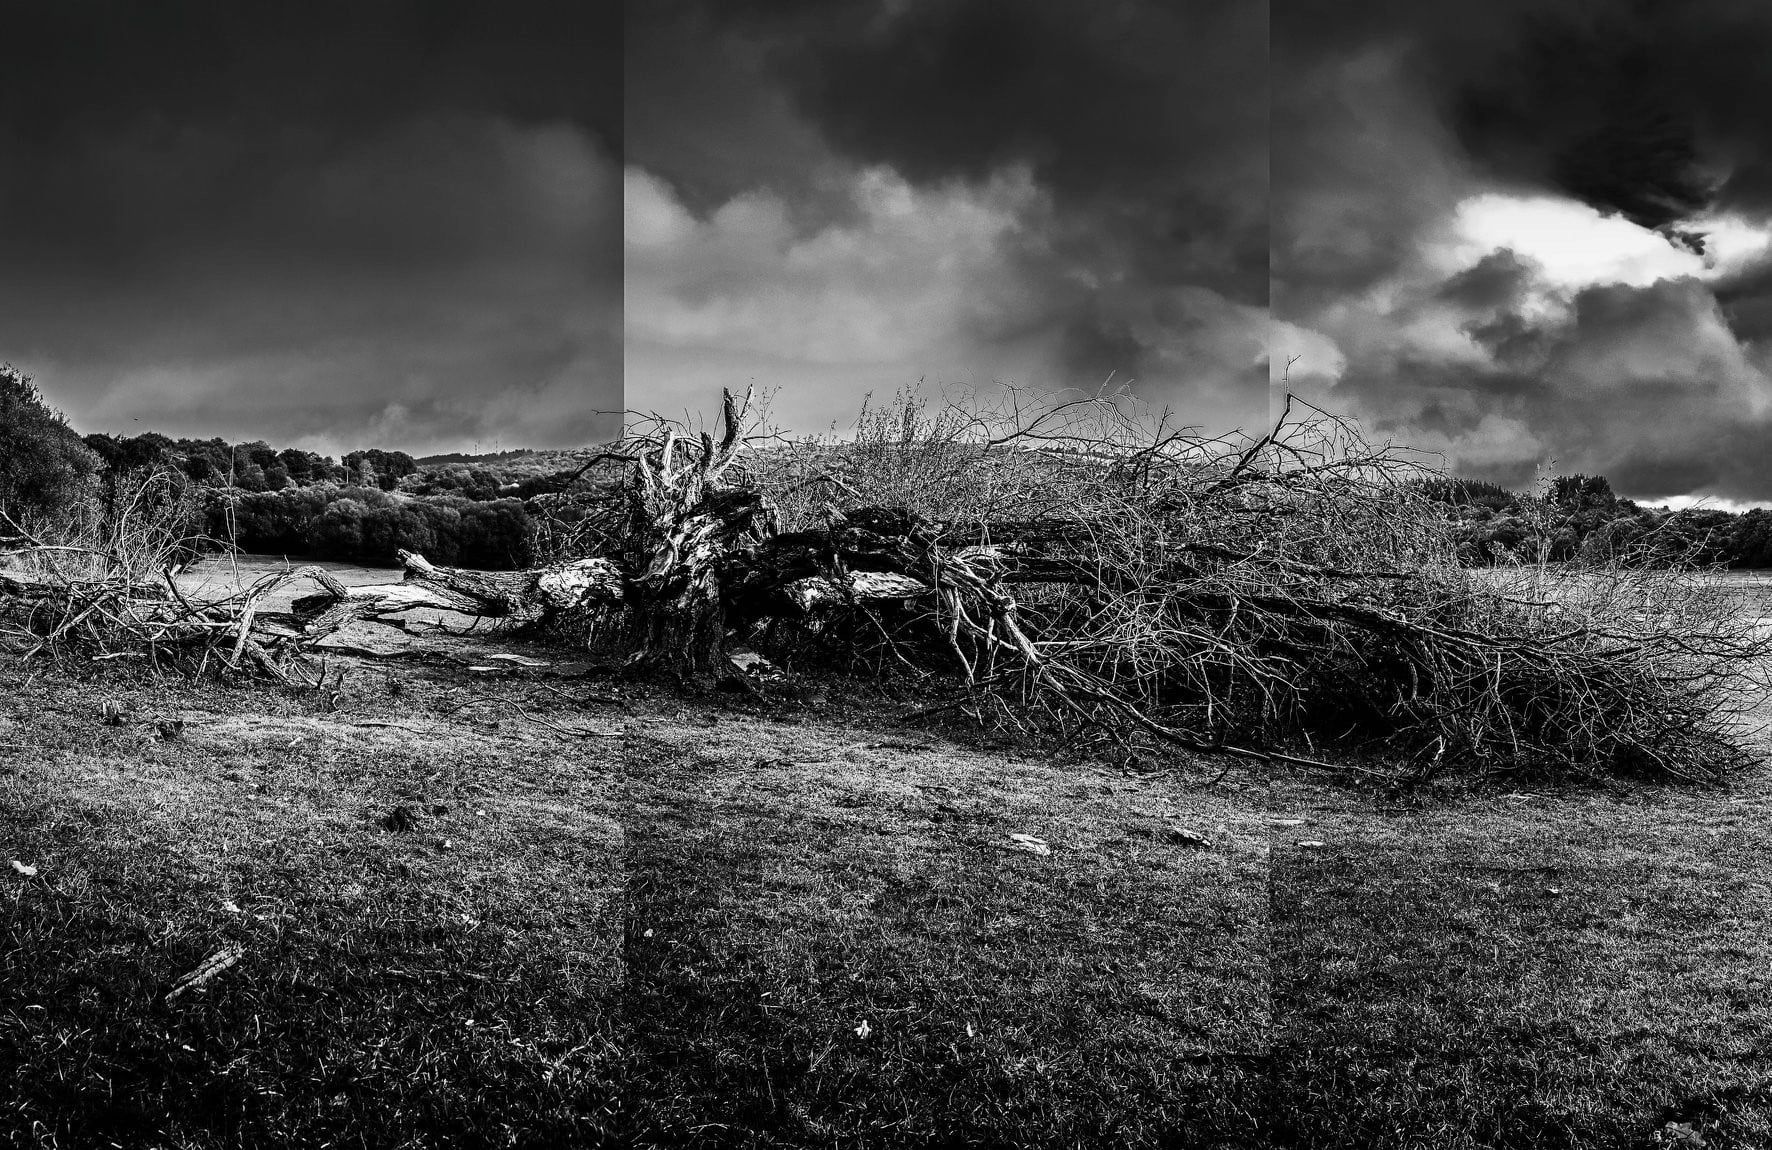 A black and white photograph from the Shadow and Light Project. It is a single image fragmented into three sections, showing a large dead tree on the ground with an ominous sky.